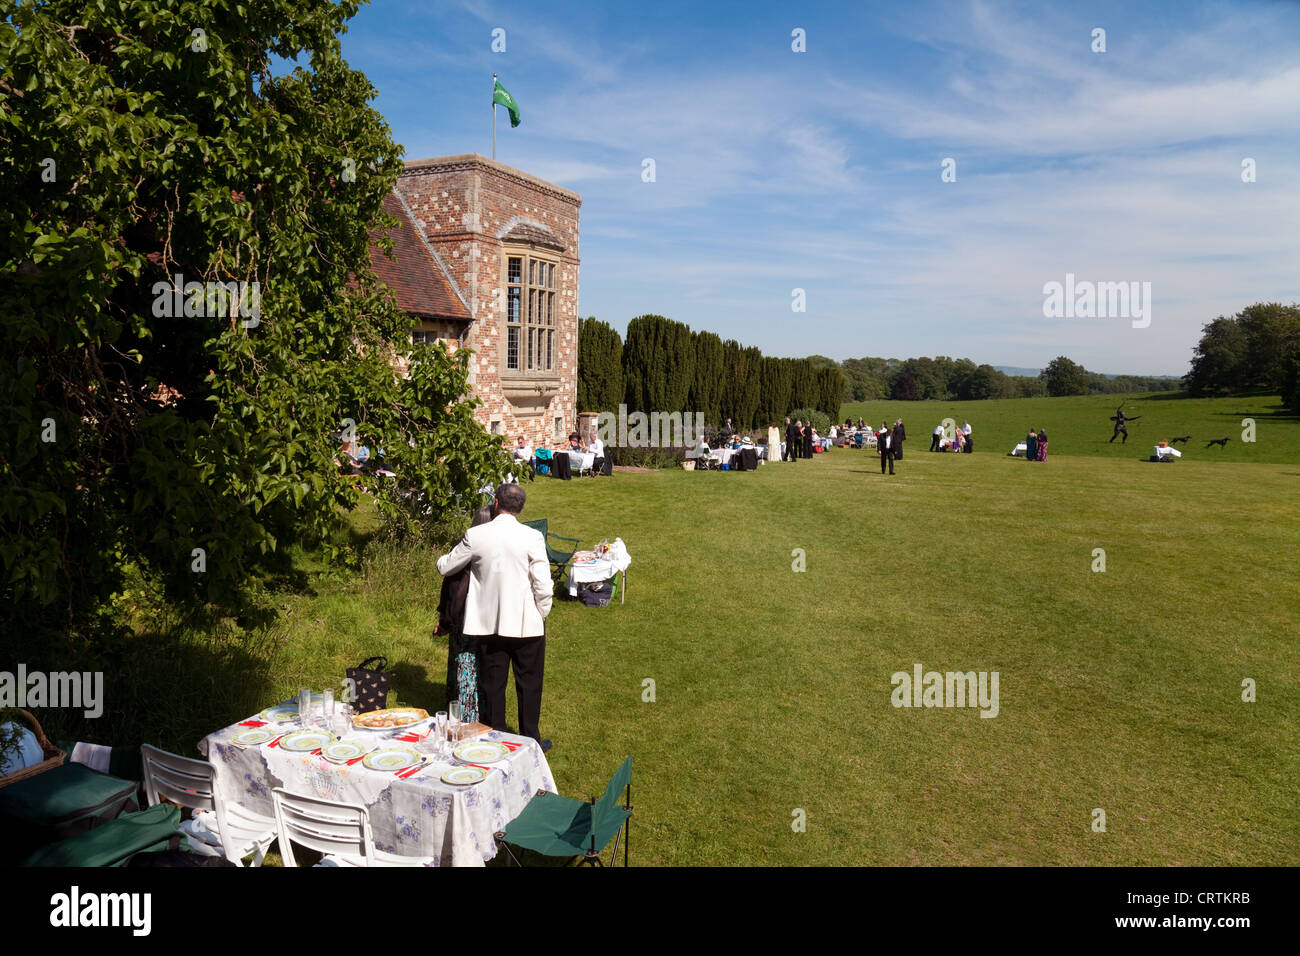 People having a picnic on the lawns at the Glyndebourne opera festival, Lewes, Sussex UK Stock Photo